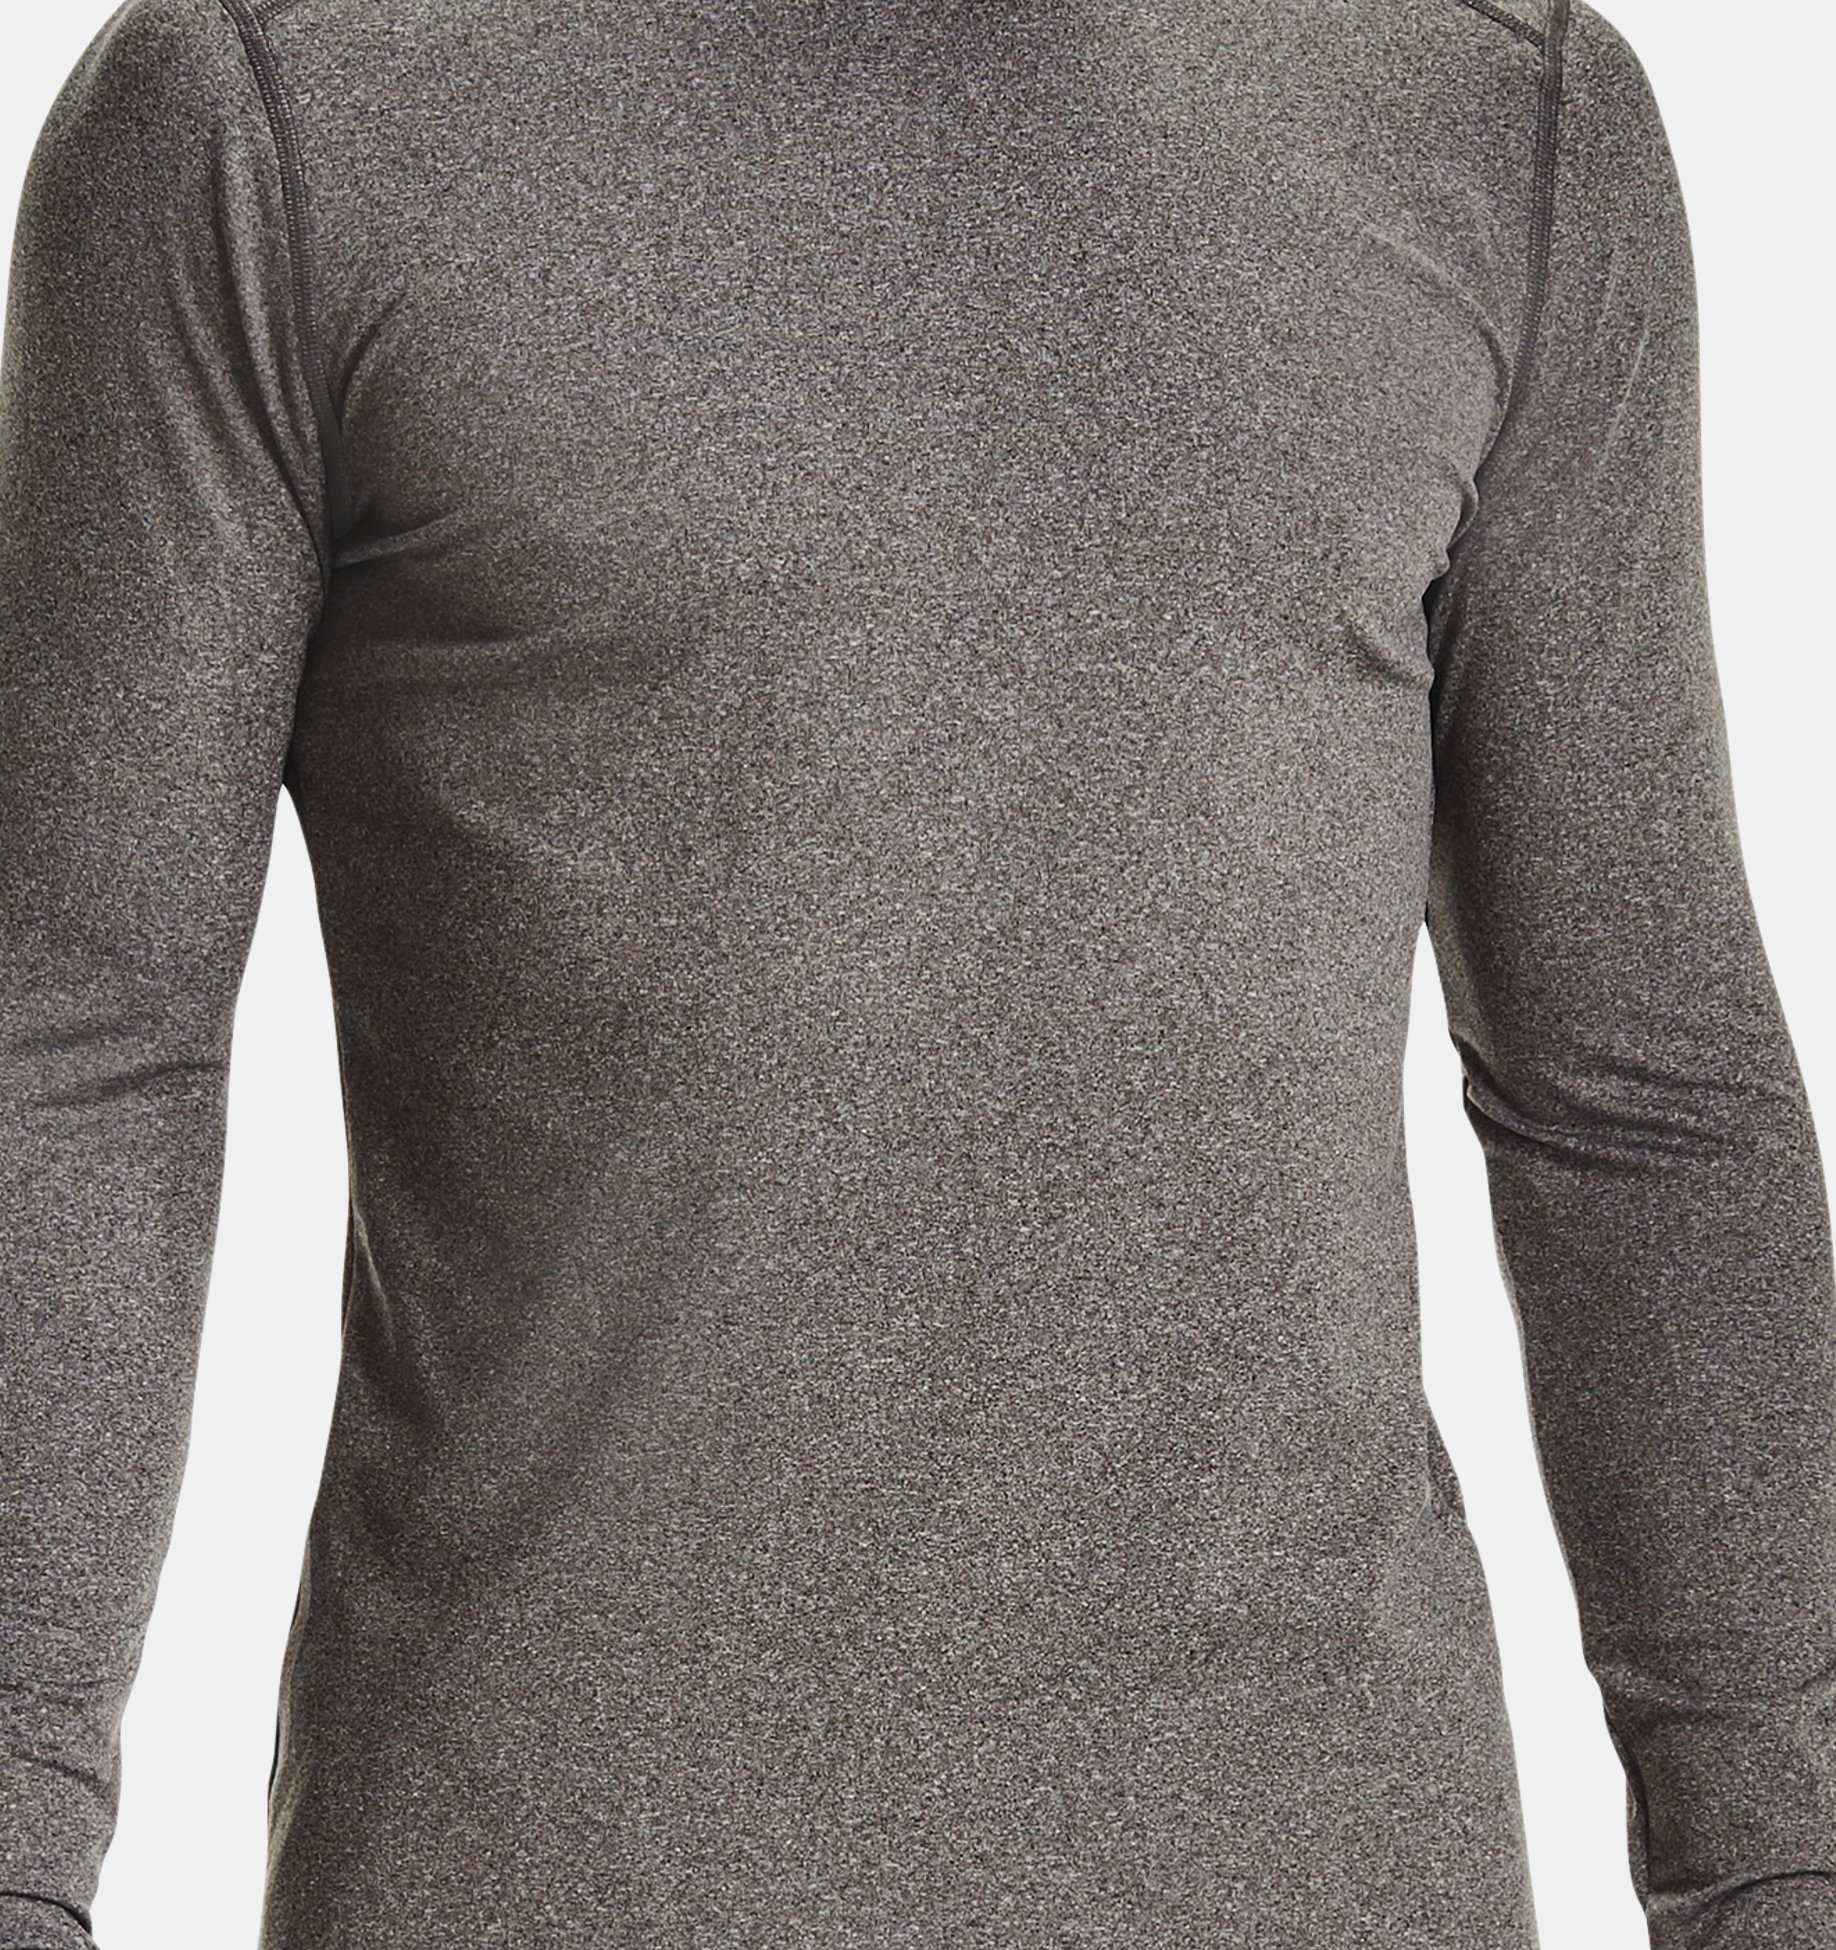 Men's ColdGear® Armour Fitted Mock Long Sleeve | Under Armour